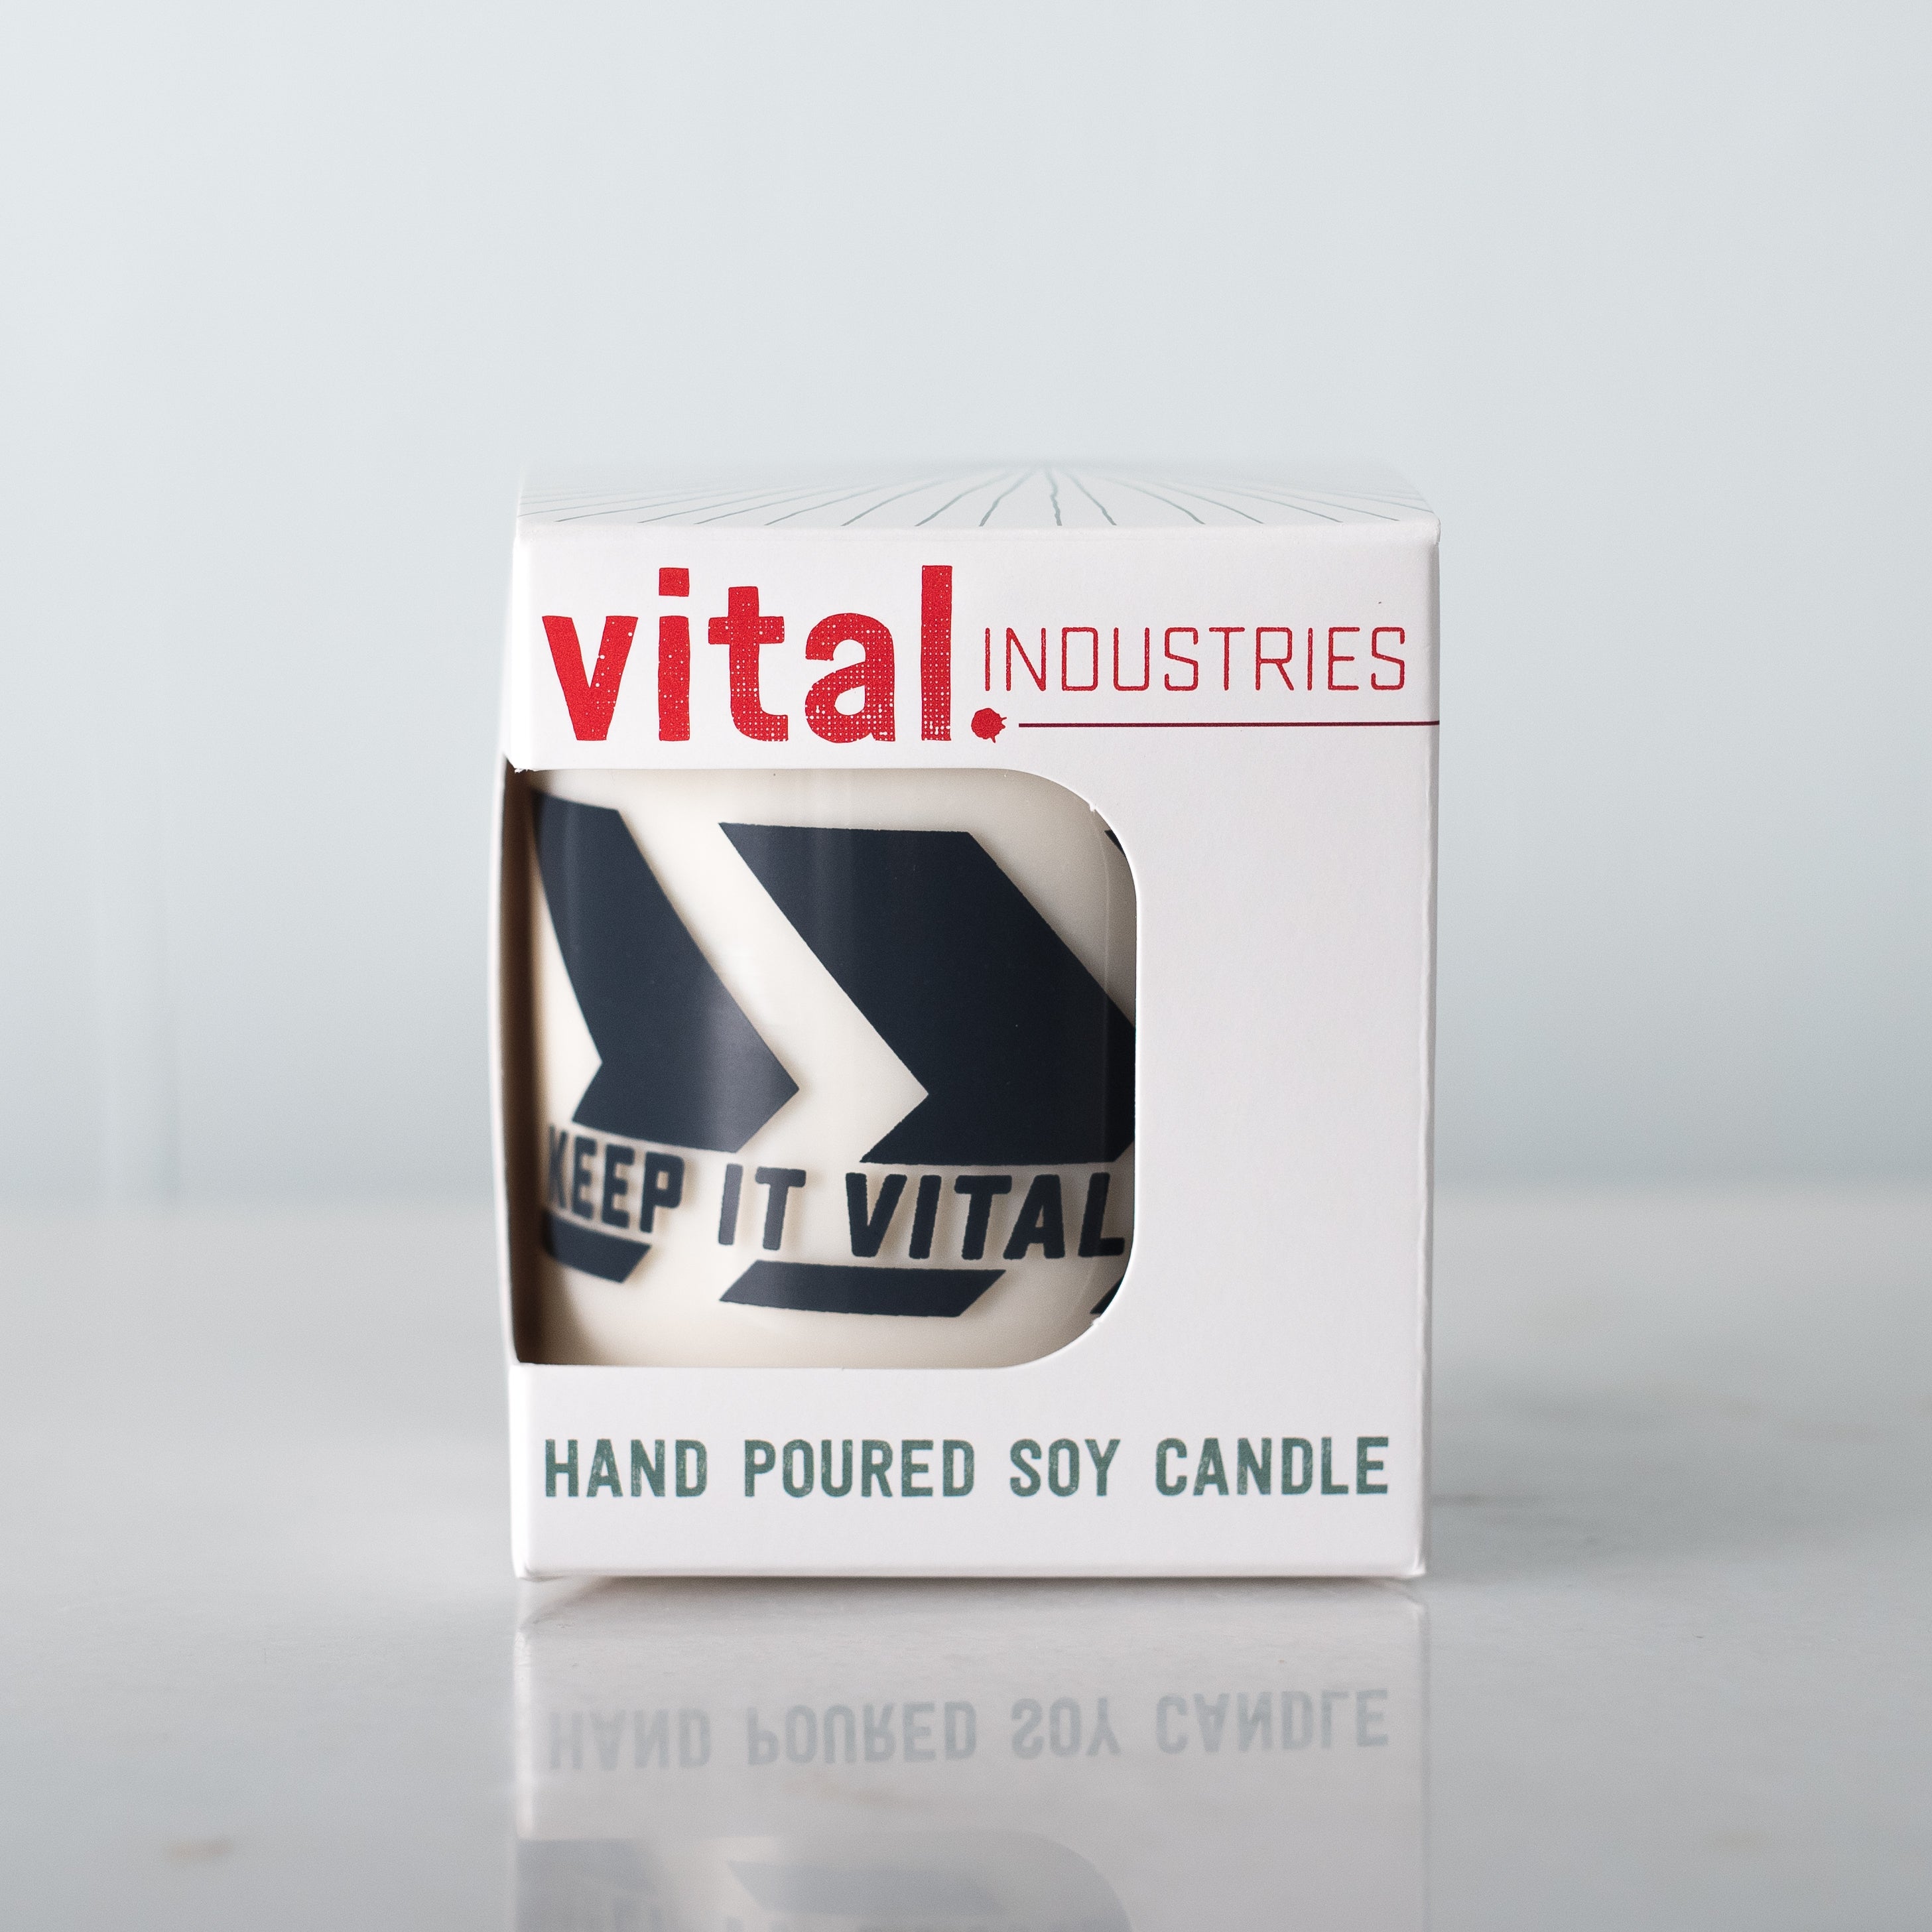 Vital Industries hand poured soy wax candle box